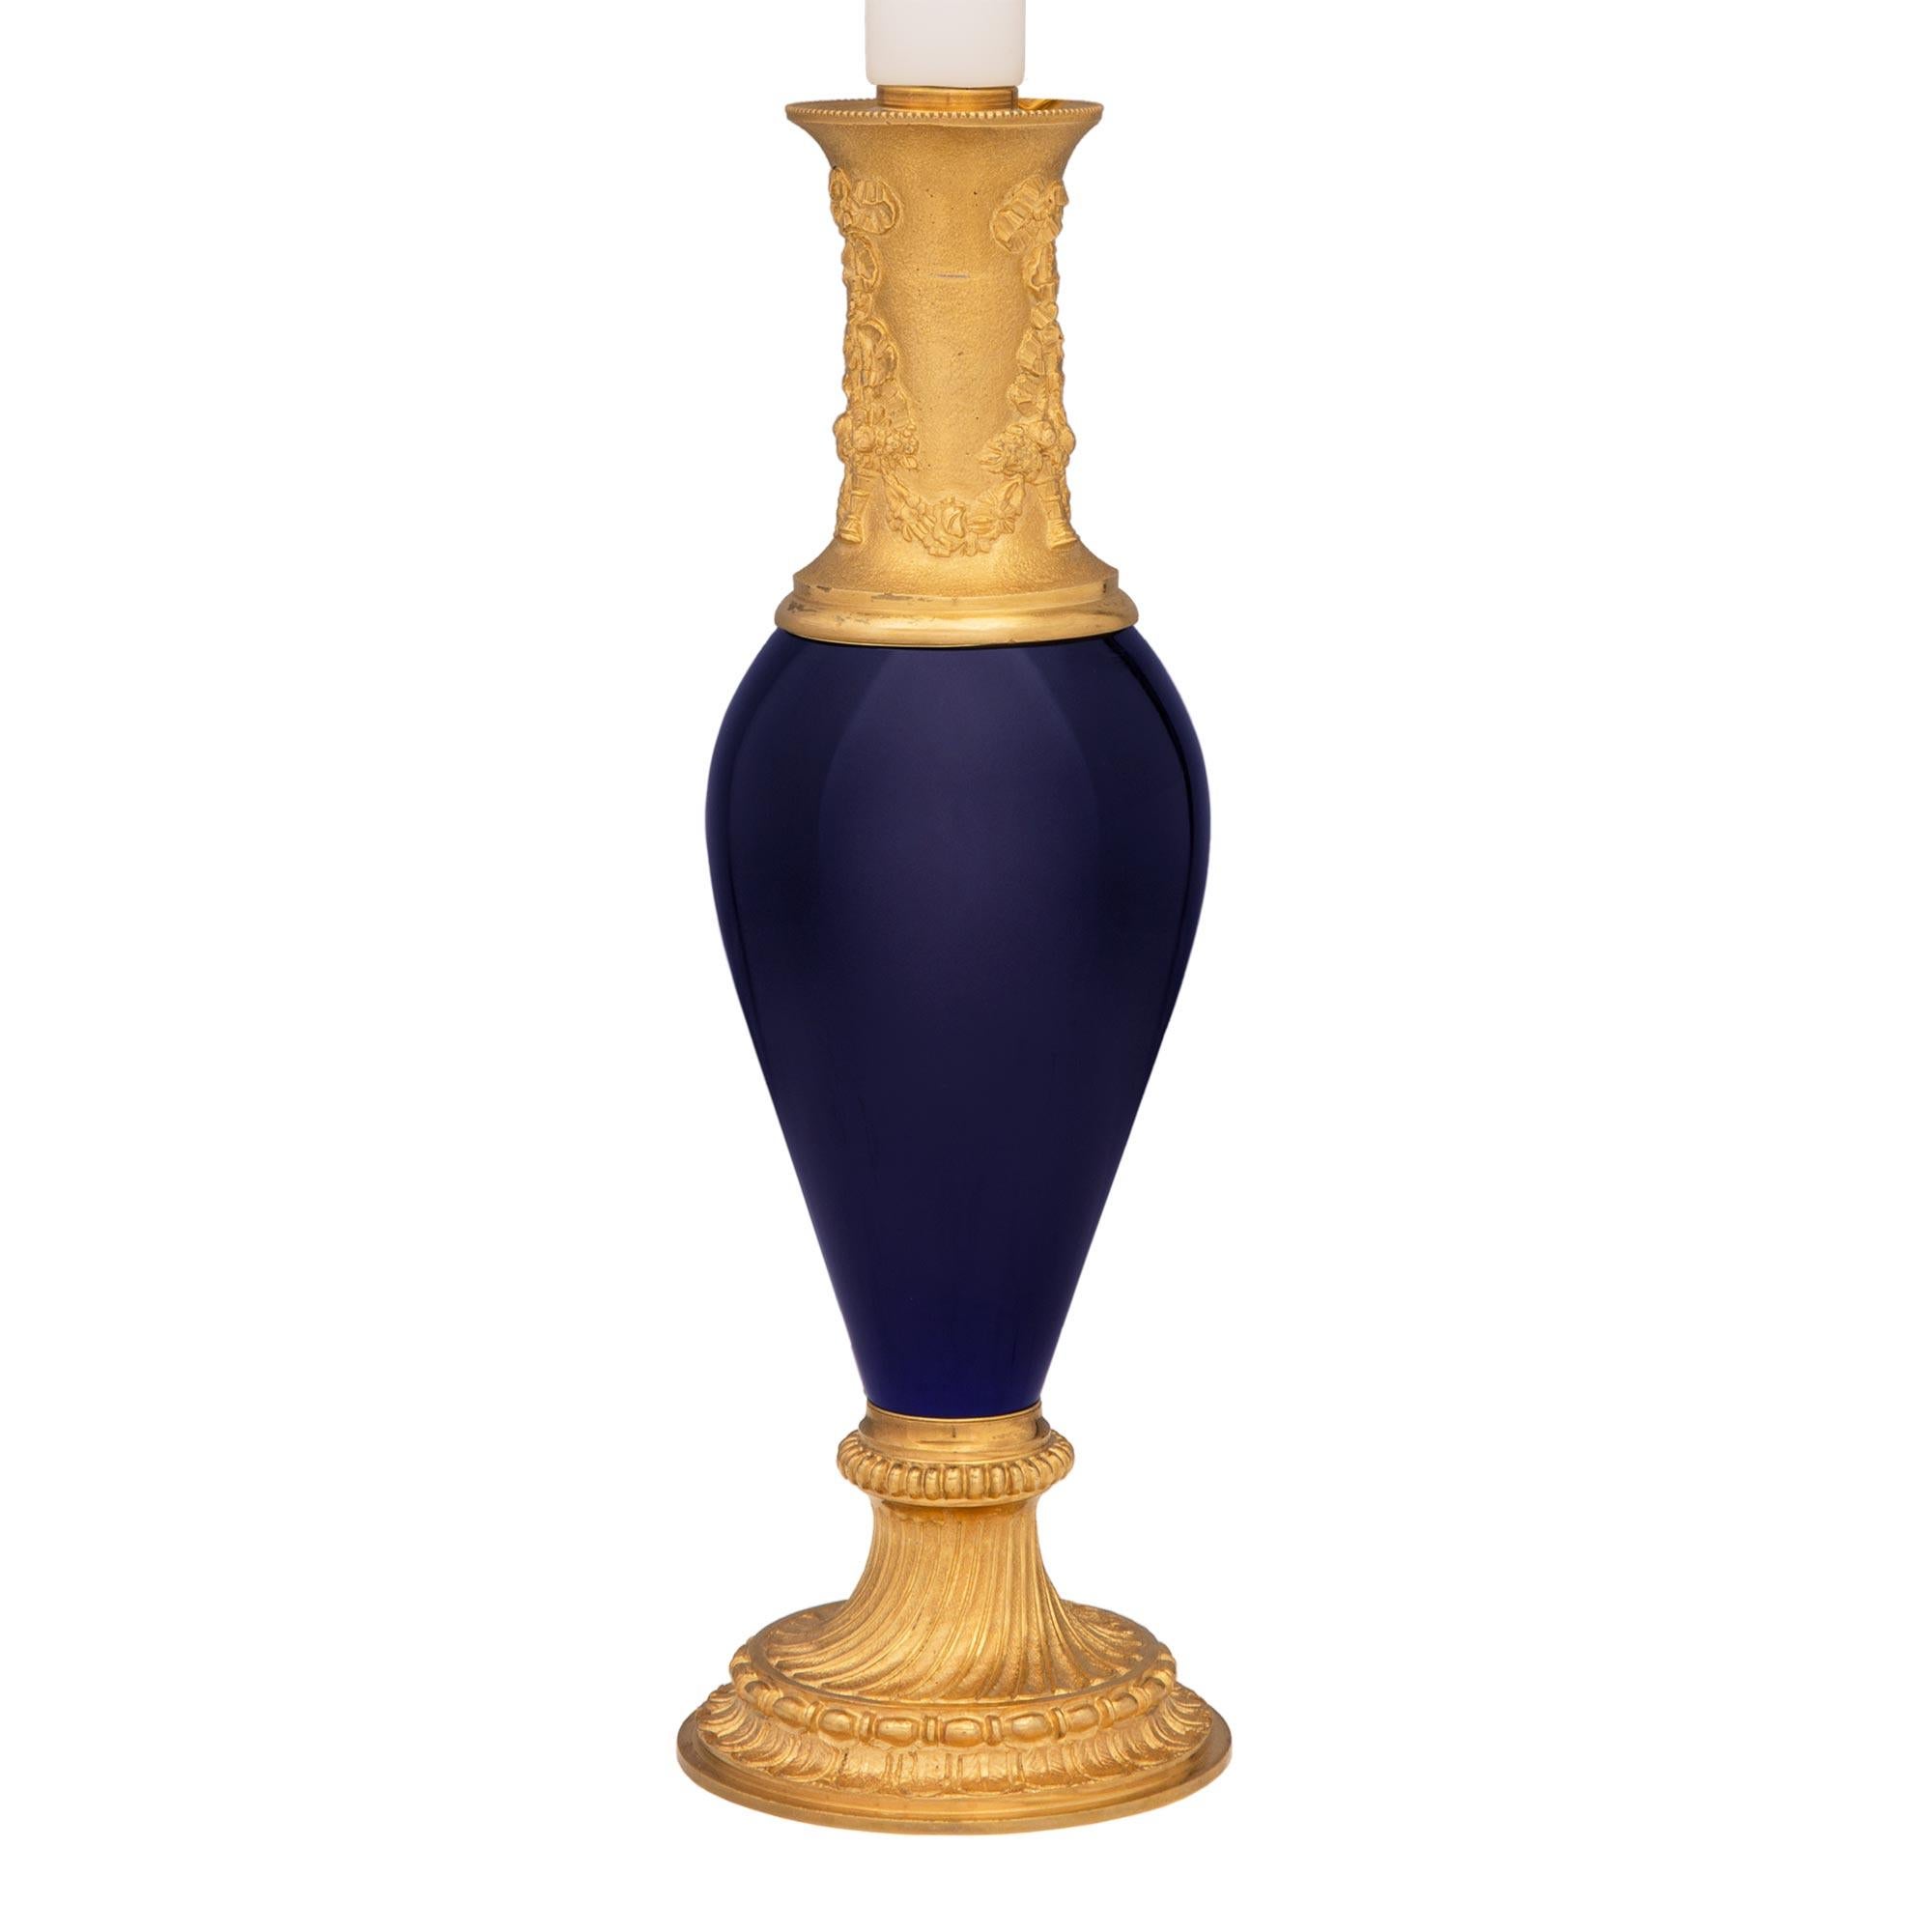 A charming and high quality pair of French 19th century Louis XVI st. cobalt blue porcelain and ormolu lamps. Each small scale lamp is raised by an elegant circular mottled base with lovely foliate designs wrap around beaded bands and beautiful